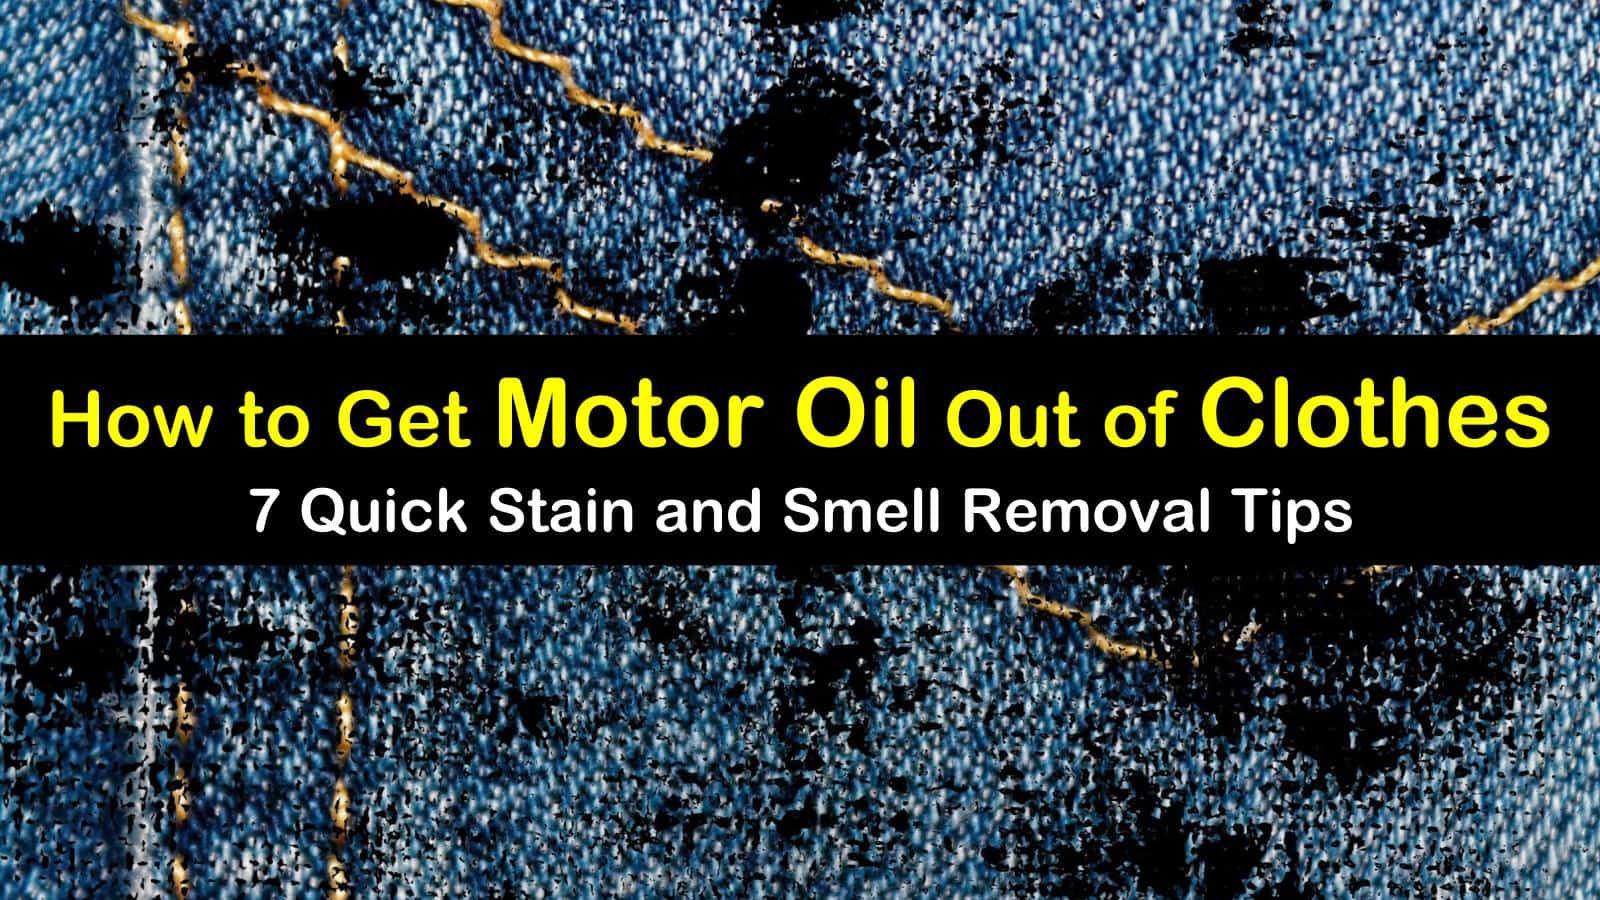 how to get motor oil out of clothes t1